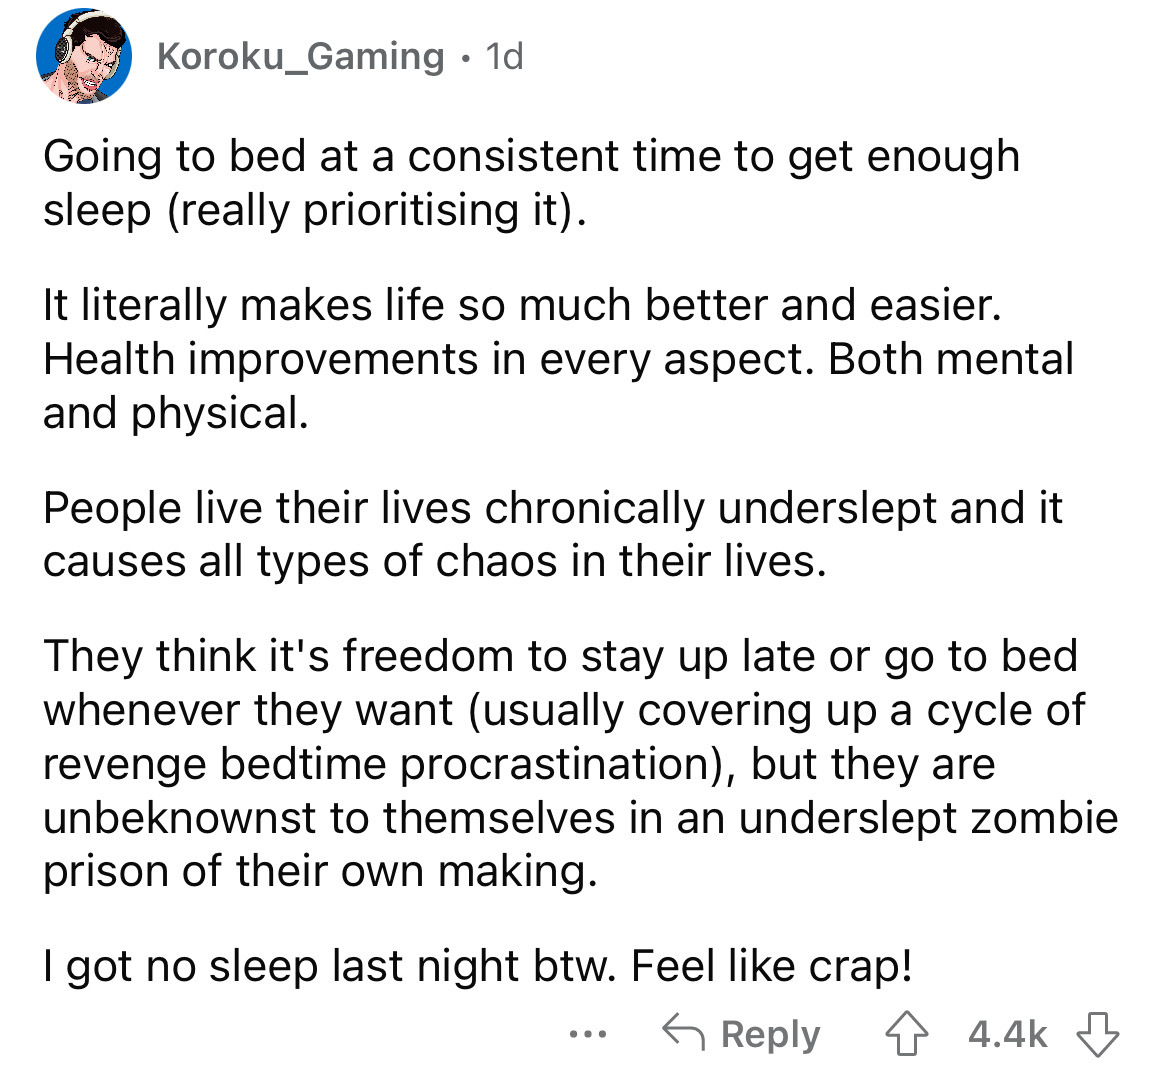 document - Koroku_Gaming 1d Going to bed at a consistent time to get enough sleep really prioritising it. It literally makes life so much better and easier. Health improvements in every aspect. Both mental and physical. People live their lives chronically